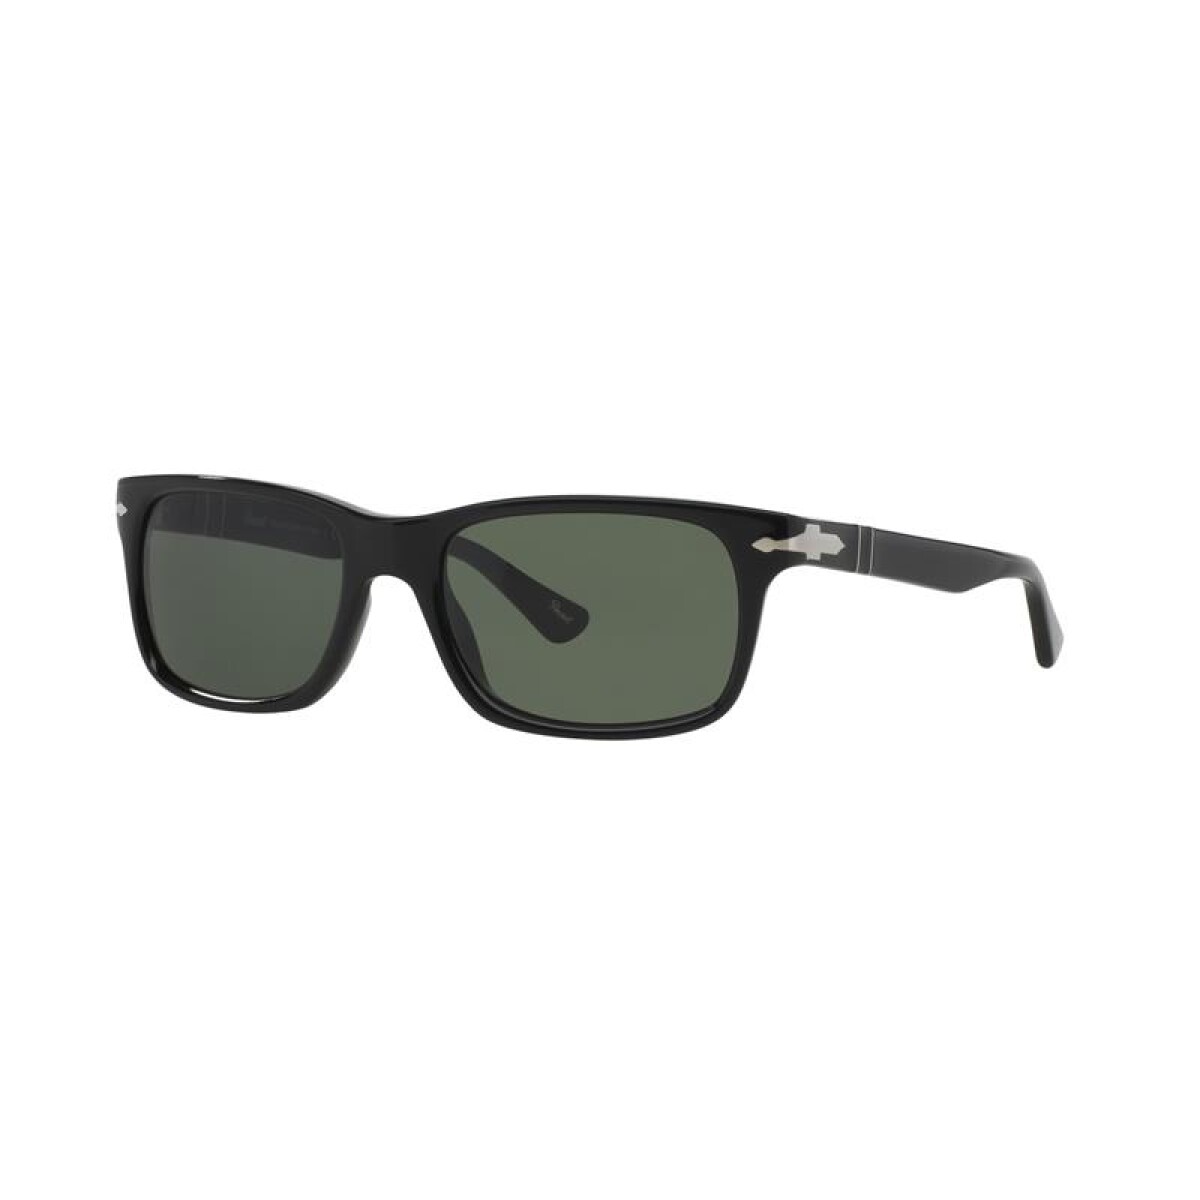 Persol 3048-s - 95/31 